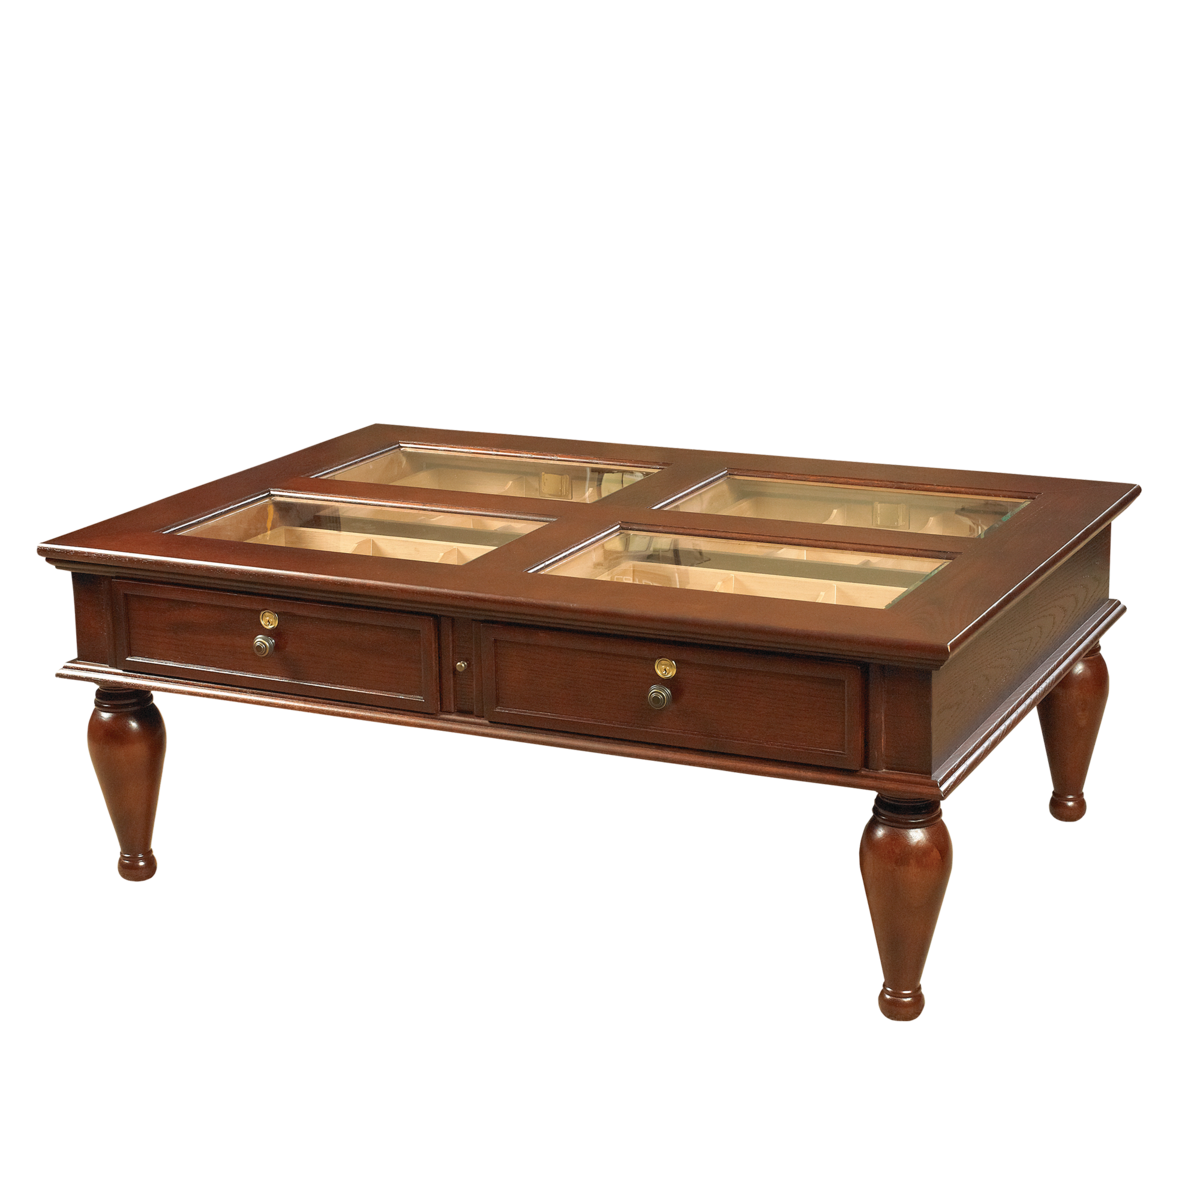 Quality Importers Glass Top Coffee Table Humidor in Mahogany